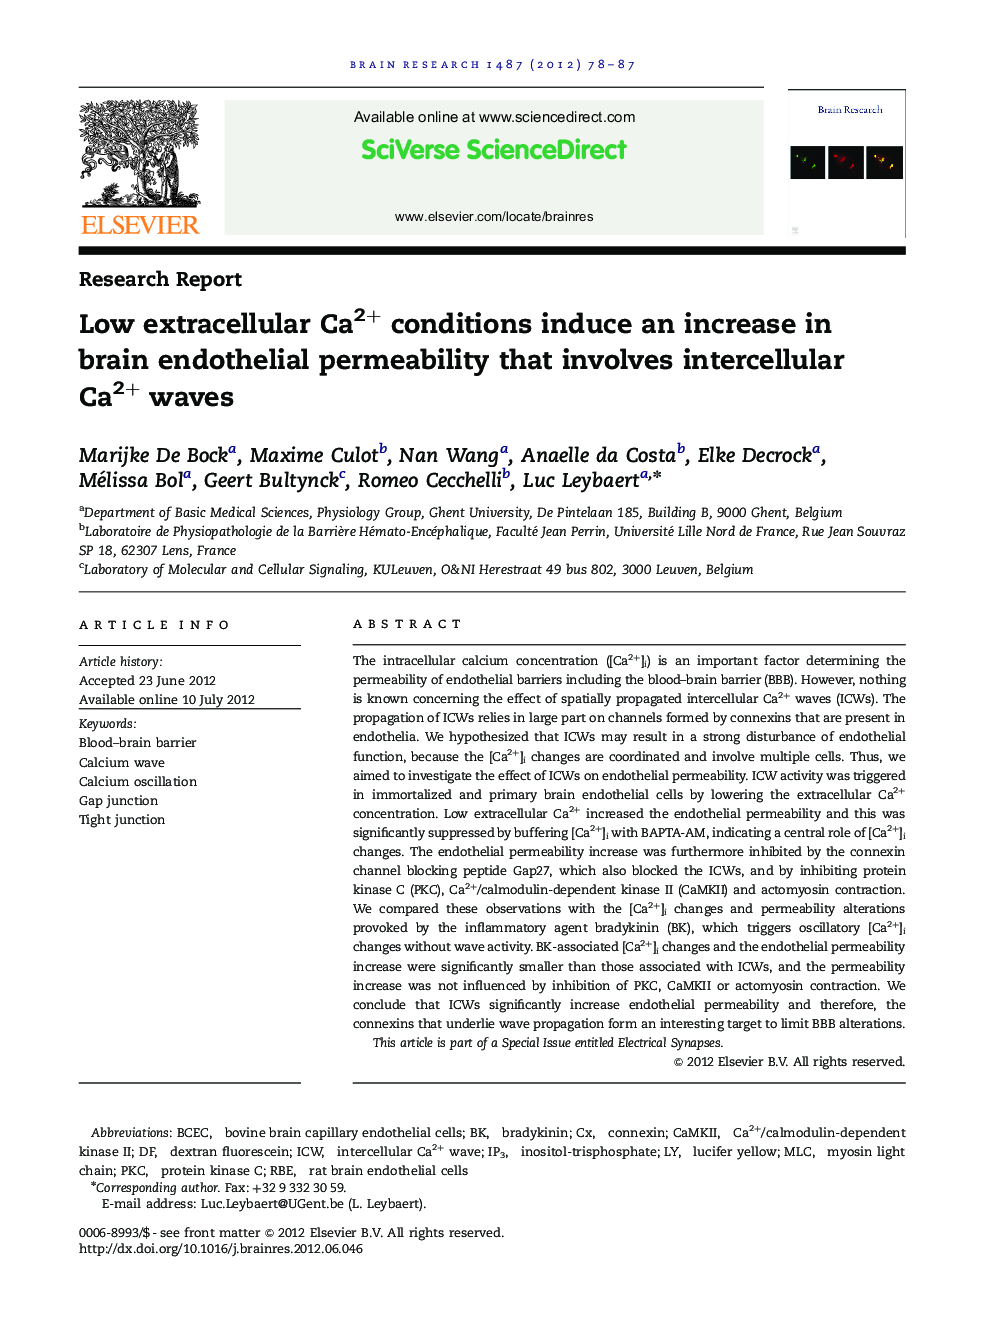 Low extracellular Ca2+ conditions induce an increase in brain endothelial permeability that involves intercellular Ca2+ waves